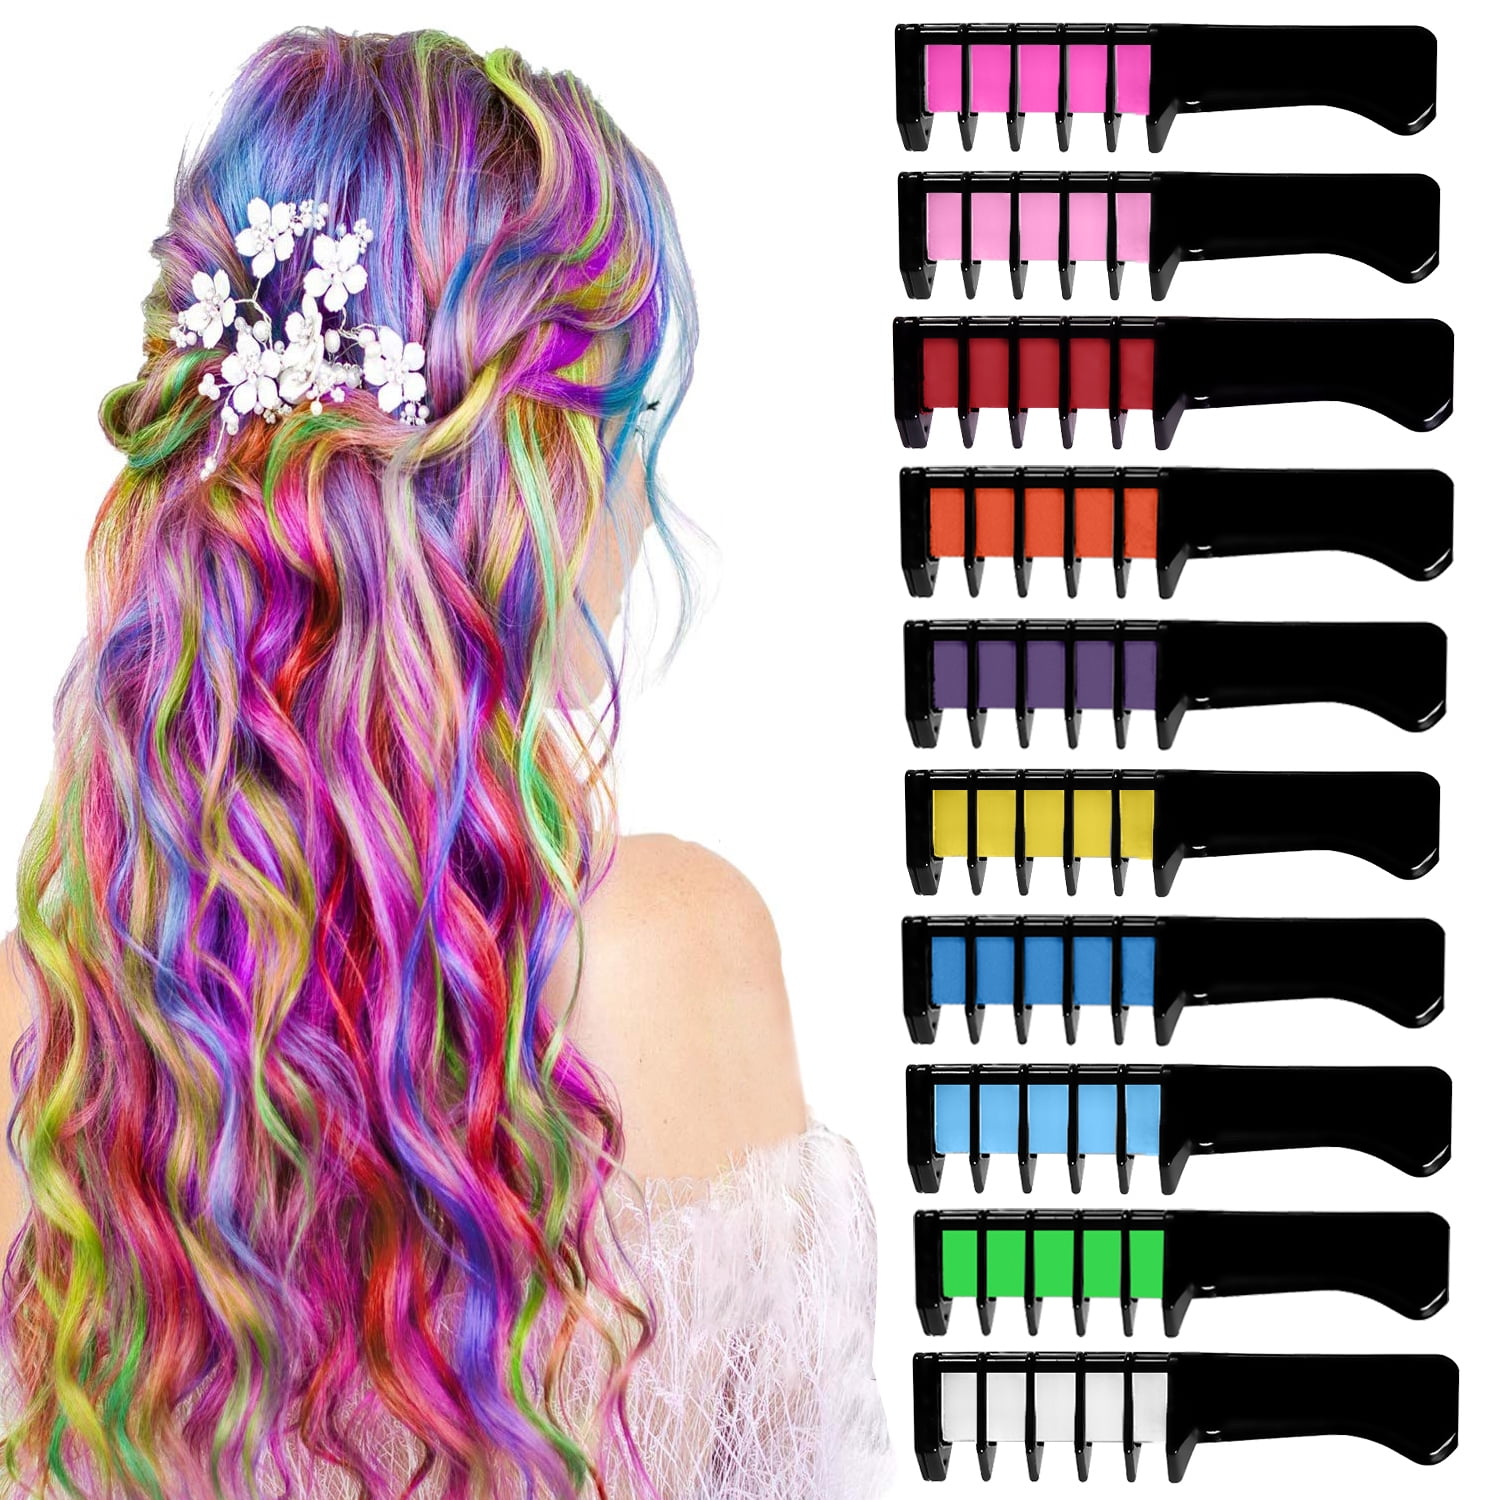 Sanmadrola Hair Chalk Comb for Girls Washable Temporary DIY Hair Color Dye  Chalk For Kids Cosplay, Christmas Gifts, 10 Colors 